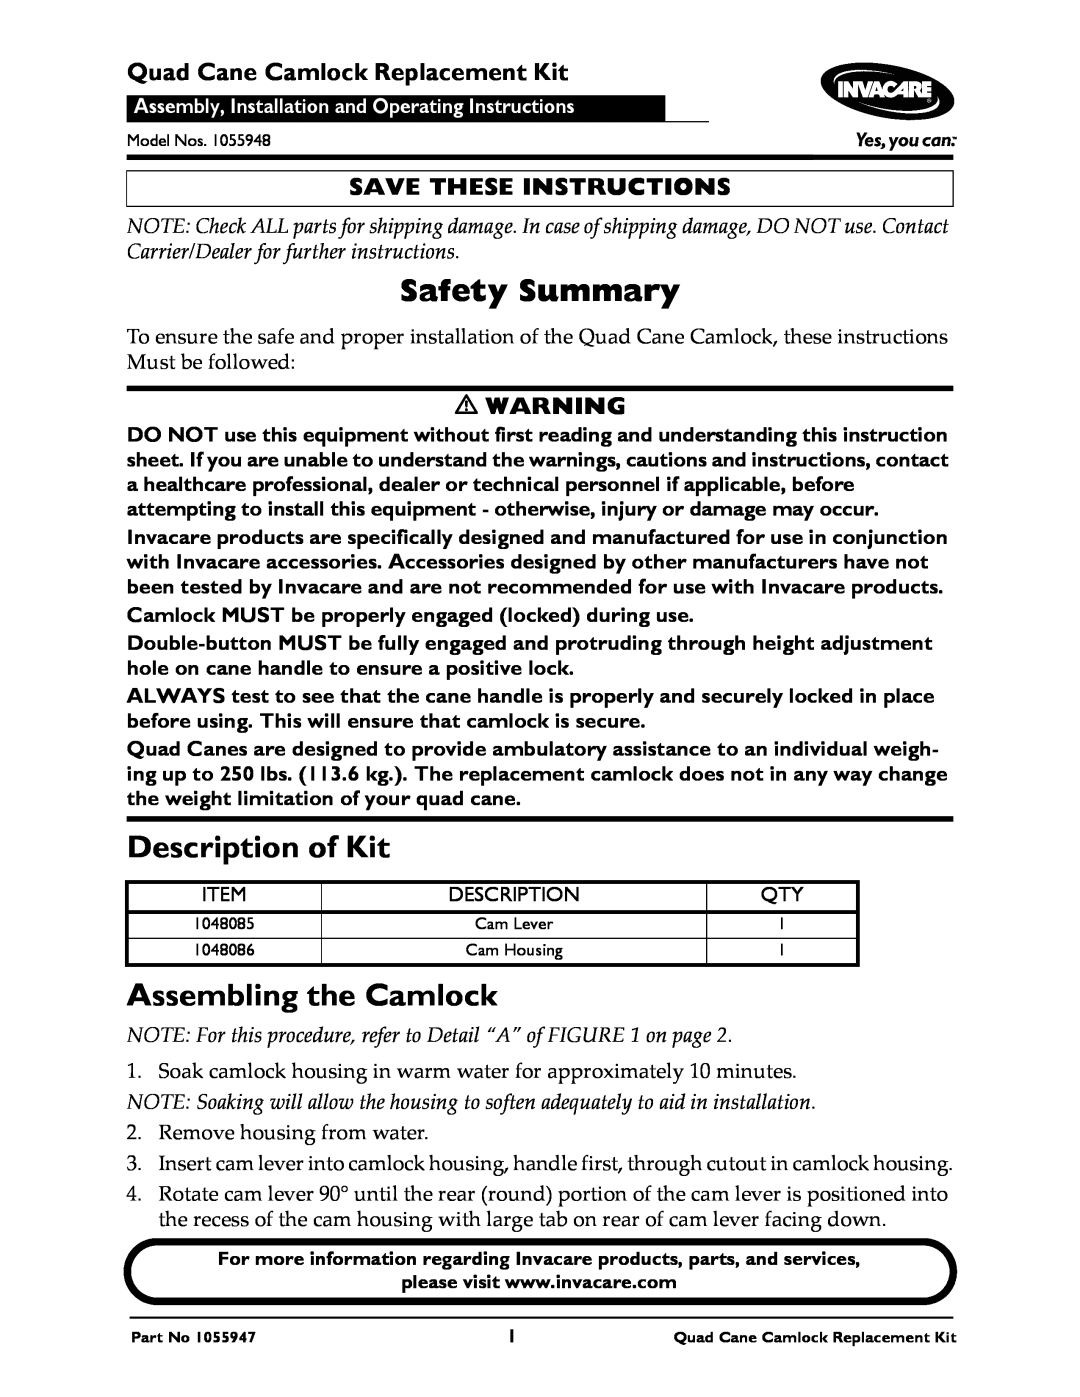 Invacare 1055947 instruction sheet Safety Summary, Description of Kit, Assembling the Camlock, Save These Instructions 